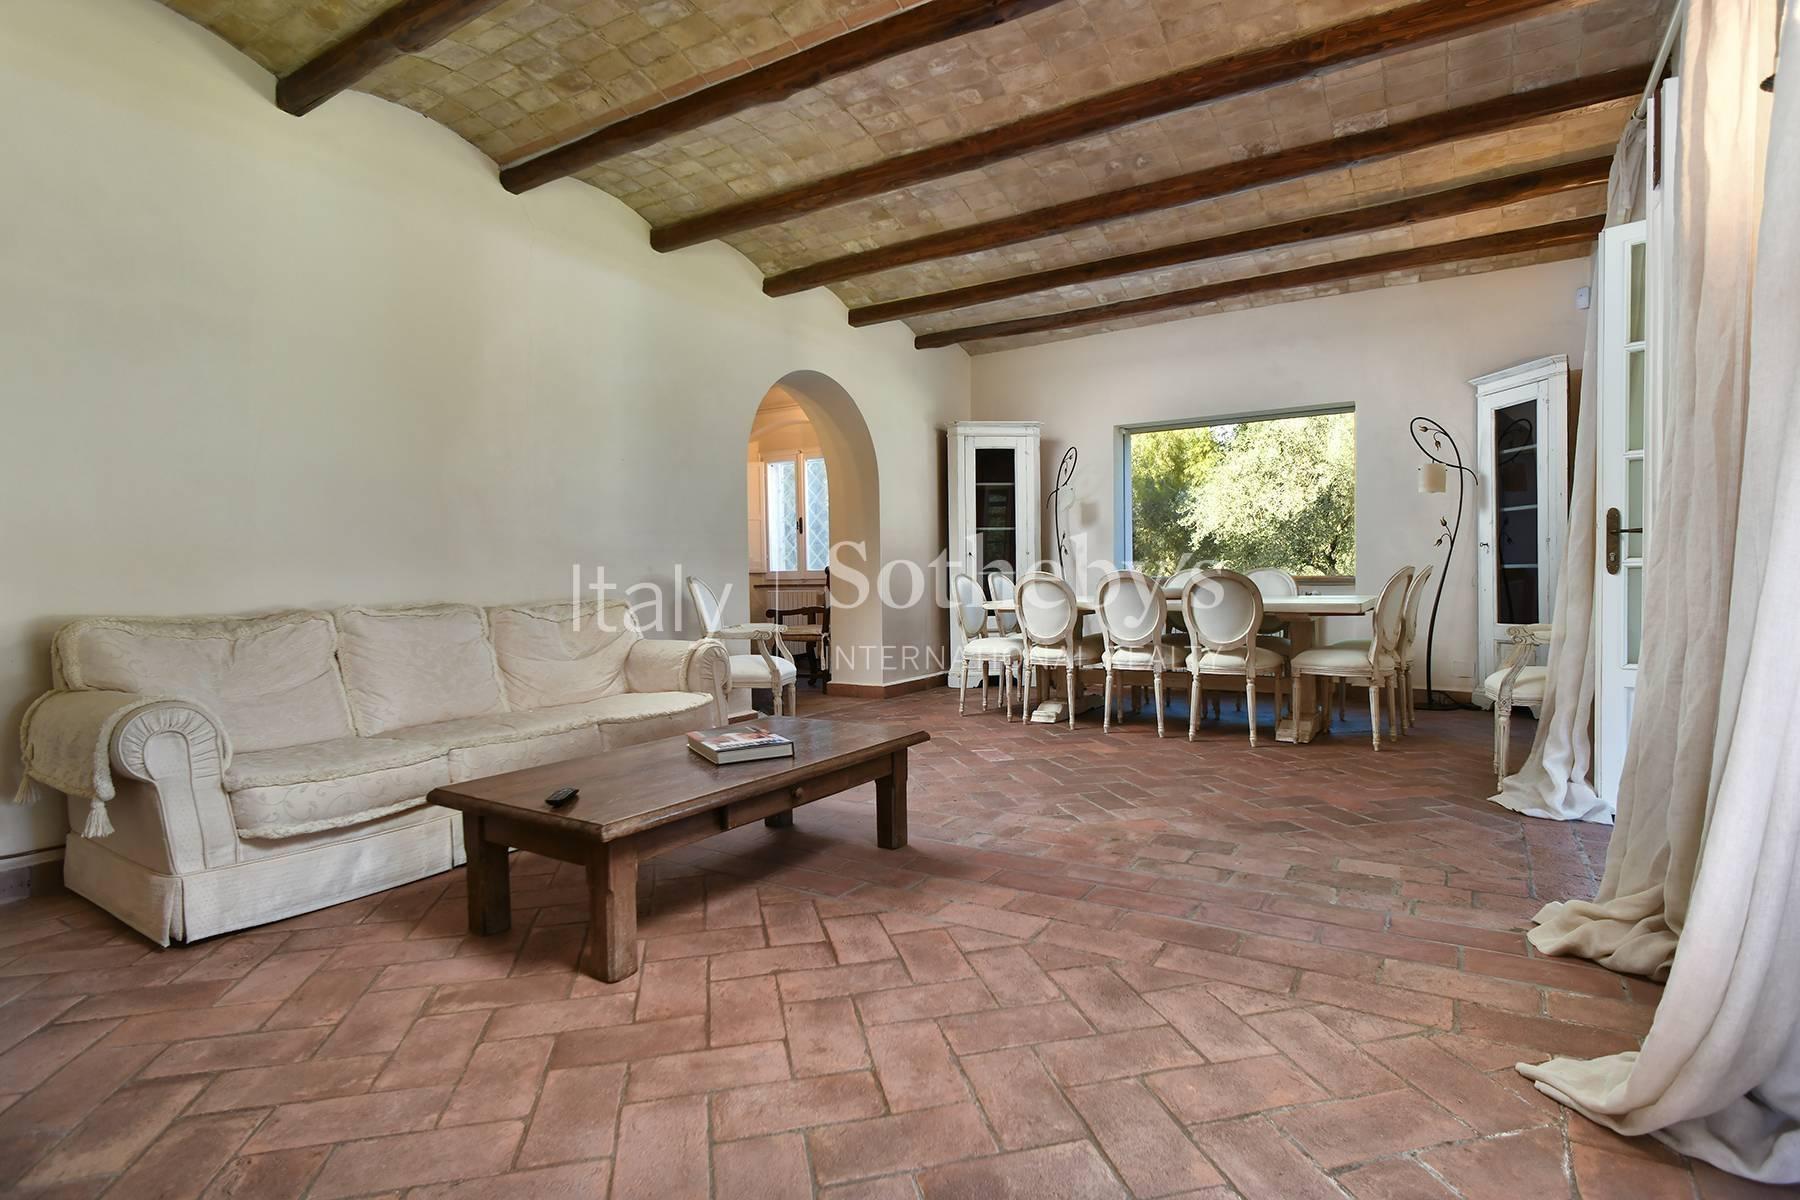 Exclusive beach house in Tuscany close to the sea - 17